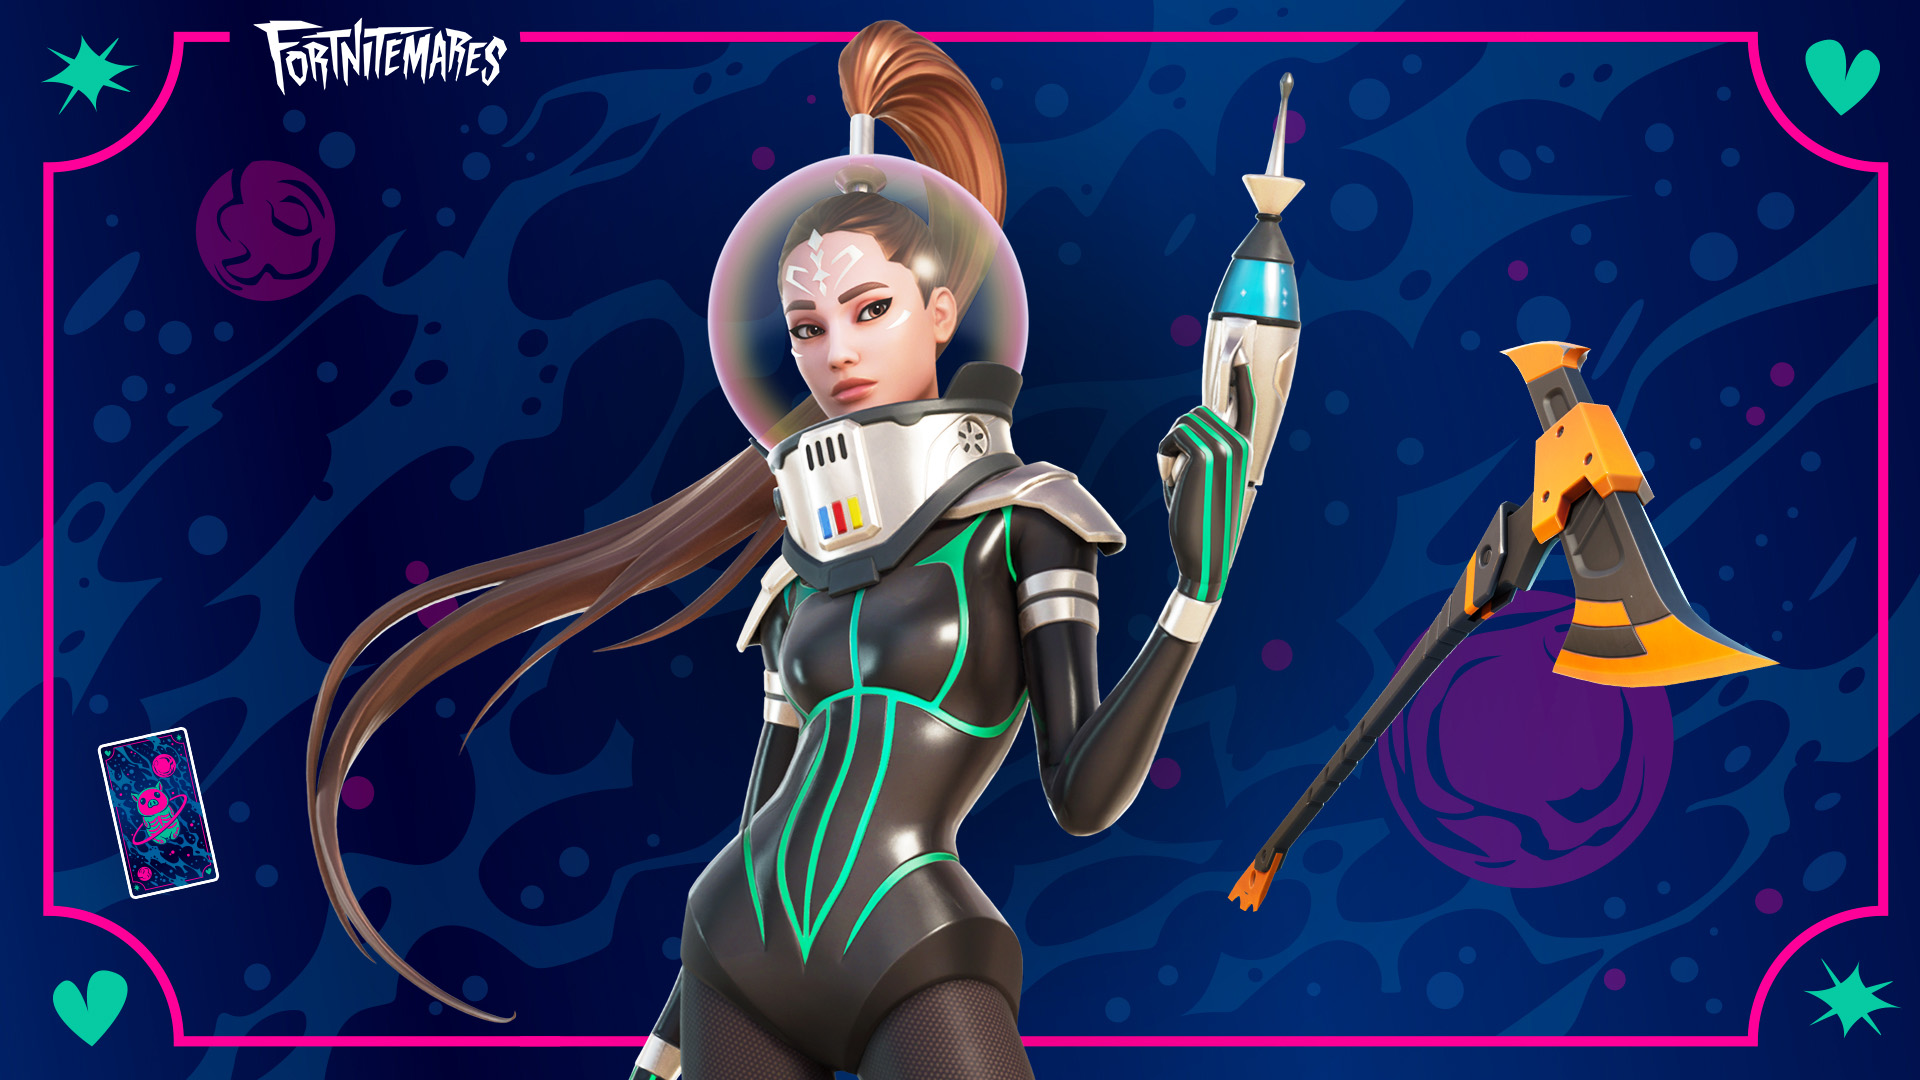 Ariana Grande is ready to take on monsters in this space-themed outfit for "Fortnite."